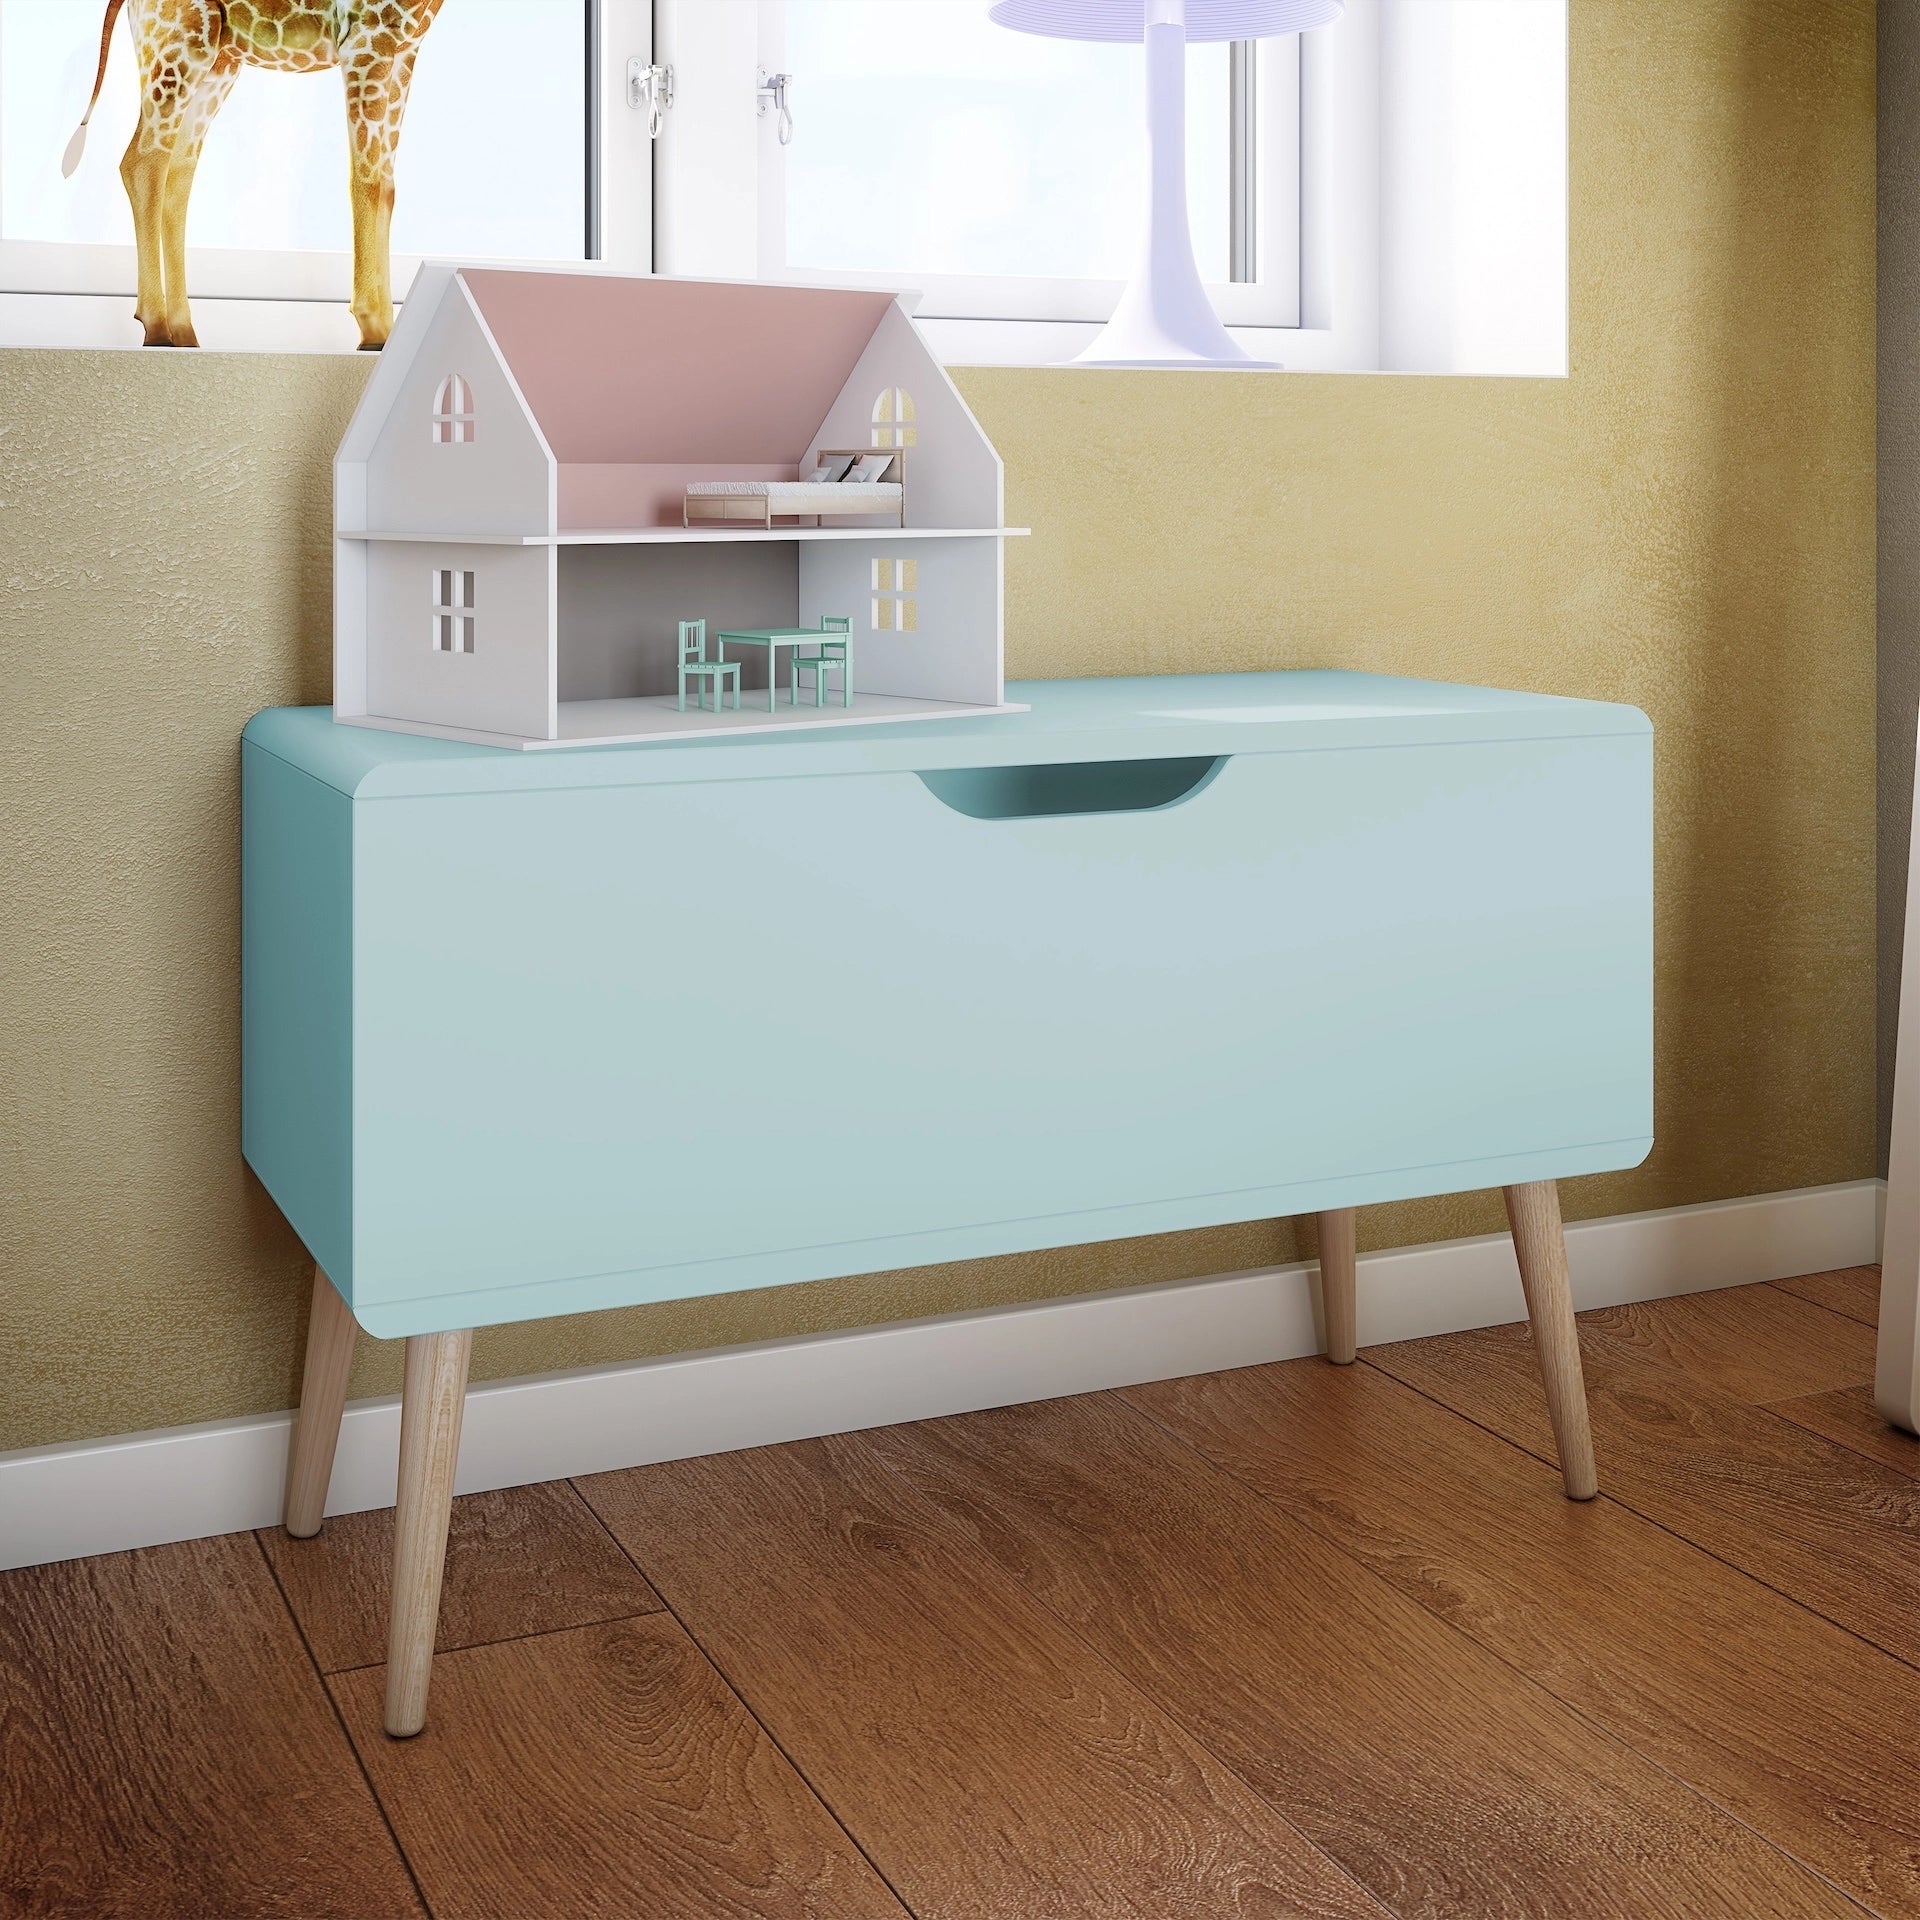 Furniture To Go Gaia Toy Box in Cool Mint